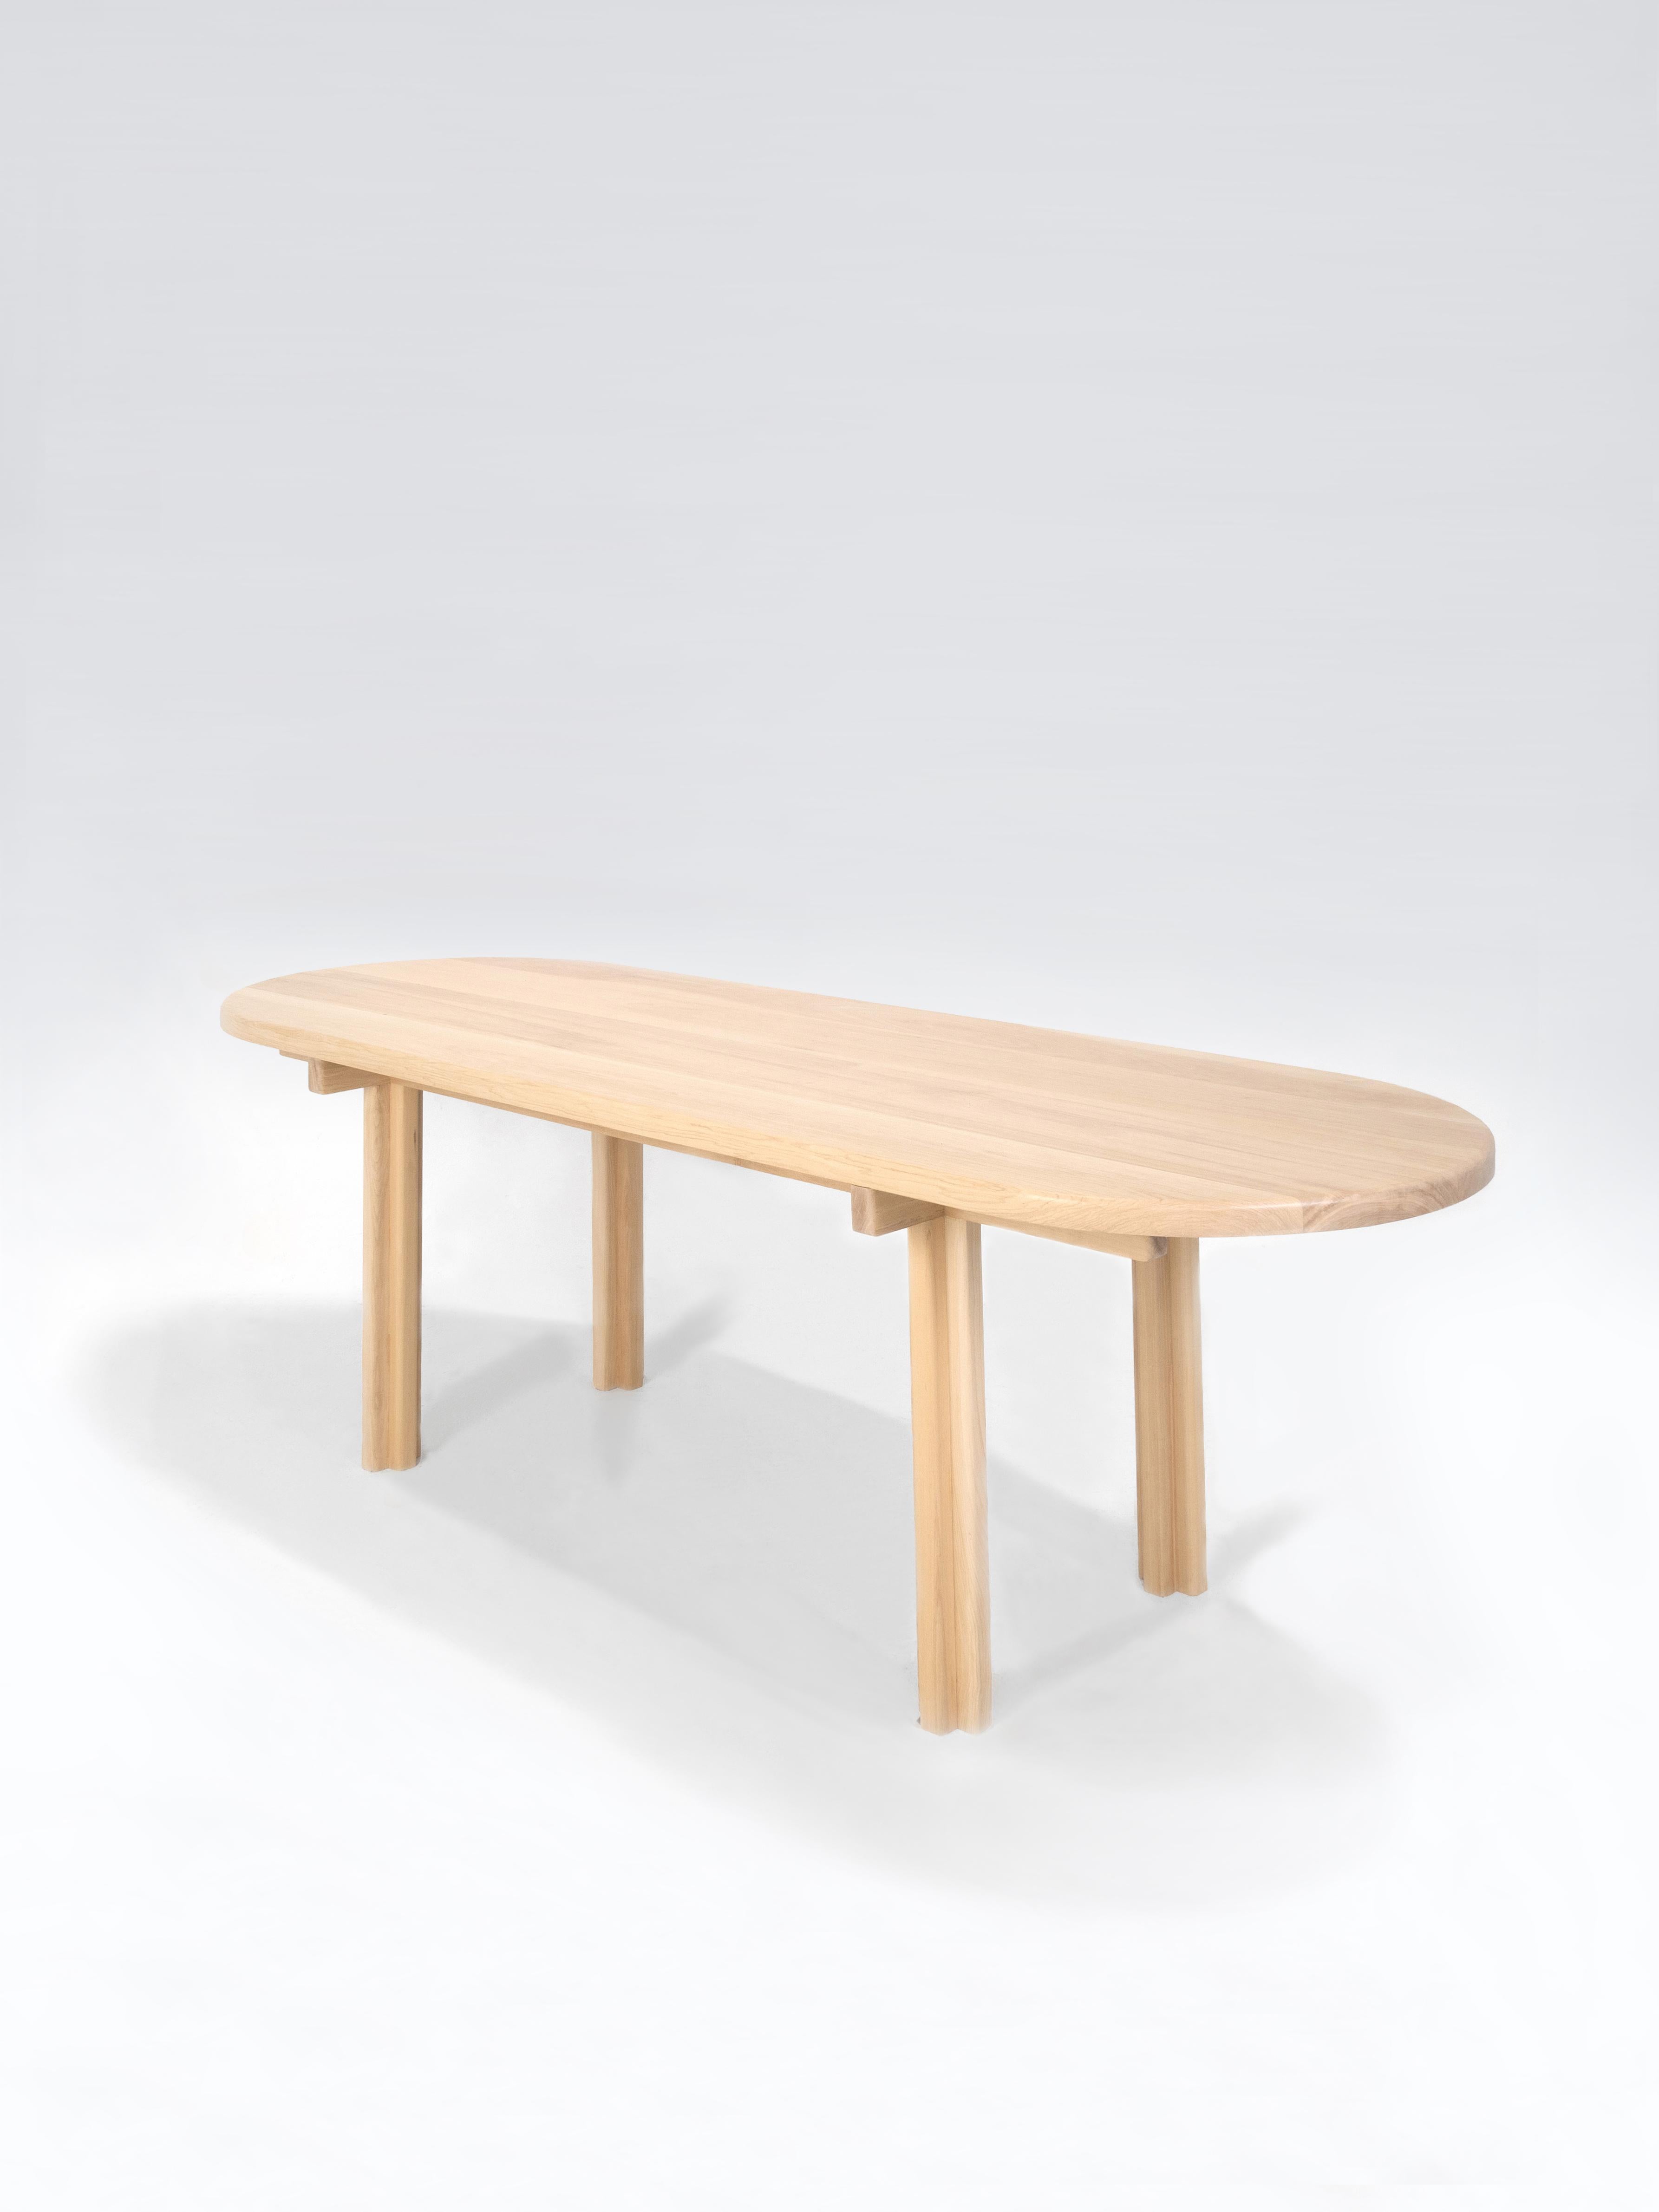 The Orno dining table is part of the Orno collection, our first to be entirely made of hardwood. All pieces were designed under a same construction system that consists of basic structural elements, columns, beams, support planes, and whose joints